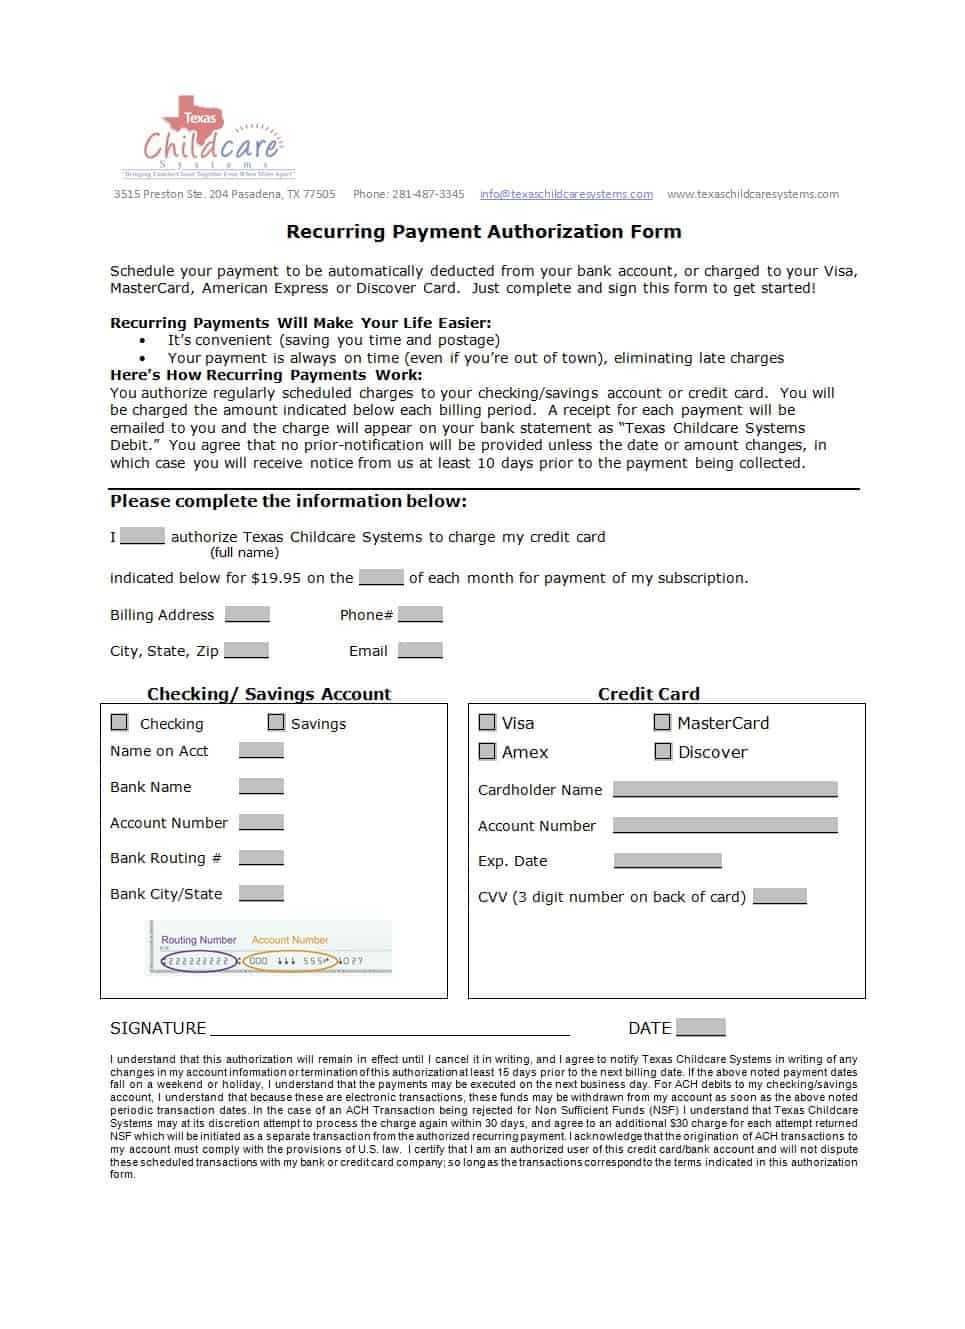 41 Credit Card Authorization Forms Templates Ready To Use Within Authorization To Charge 4331